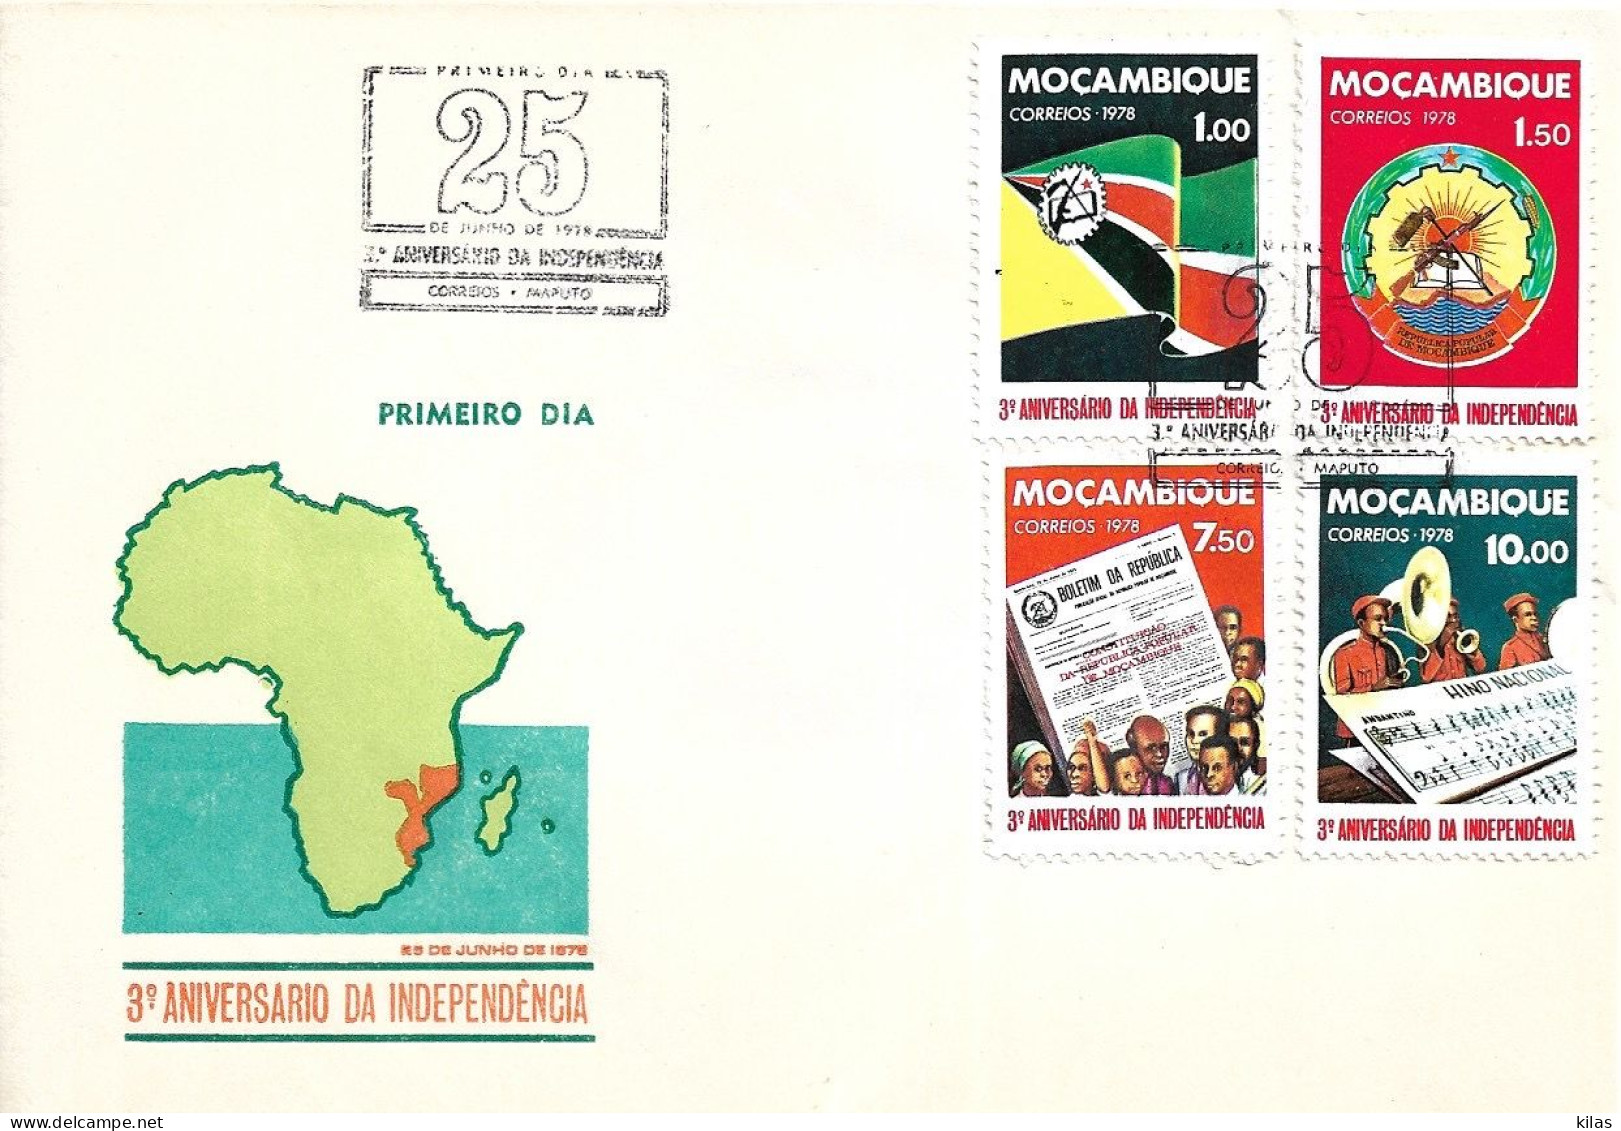 MOZAMBIQUE 1978 3rd ANNIVERSARY OF INDEPENDENCE FDC - Mosambik